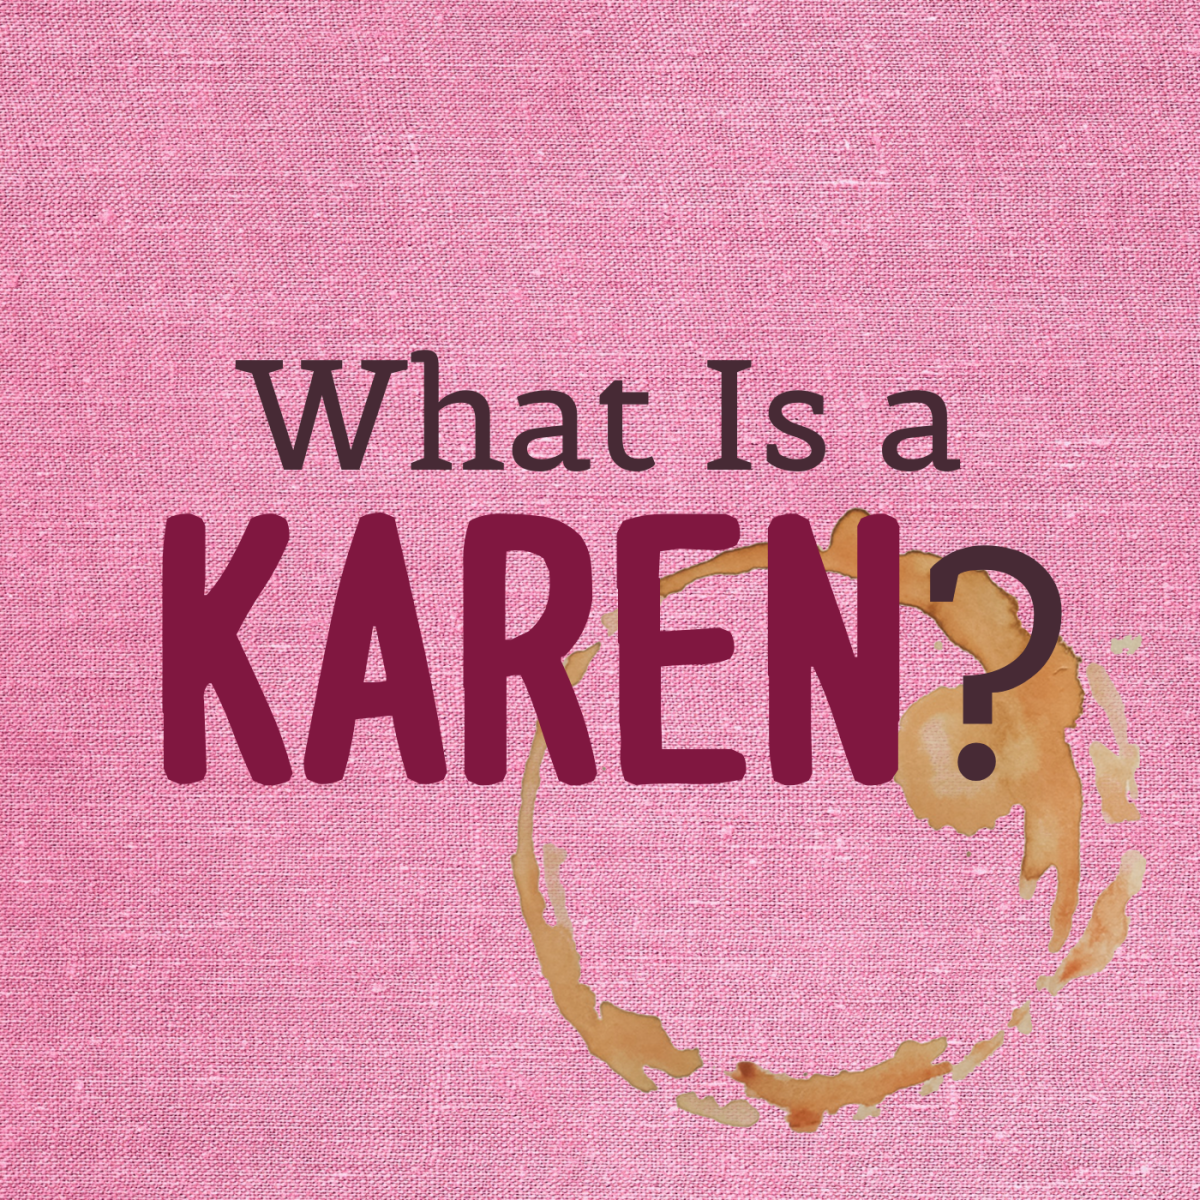 What does it mean to call someone a "Karen"? Get the definition and some examples here.